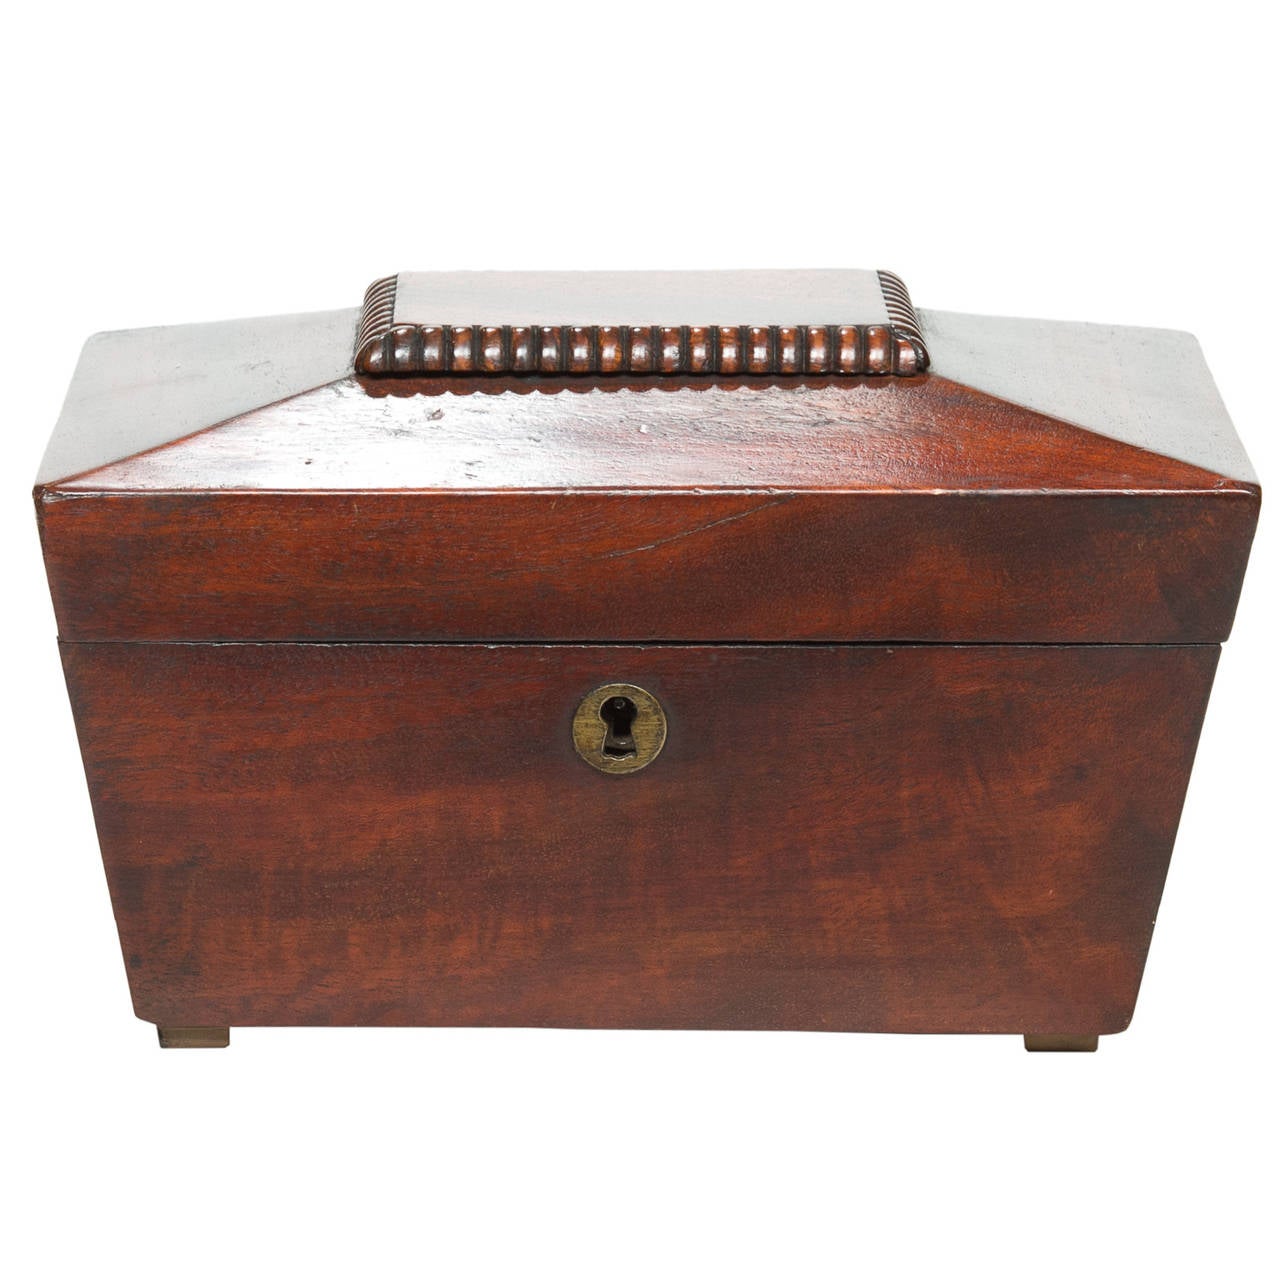 19th century Regency style mahogany tea caddy with spoon.

This tea caddy is from England and fitted with two compartments with covers and brass knobs. These reveal the relined foiled compartments. There is the tea spoon with this caddy also, not